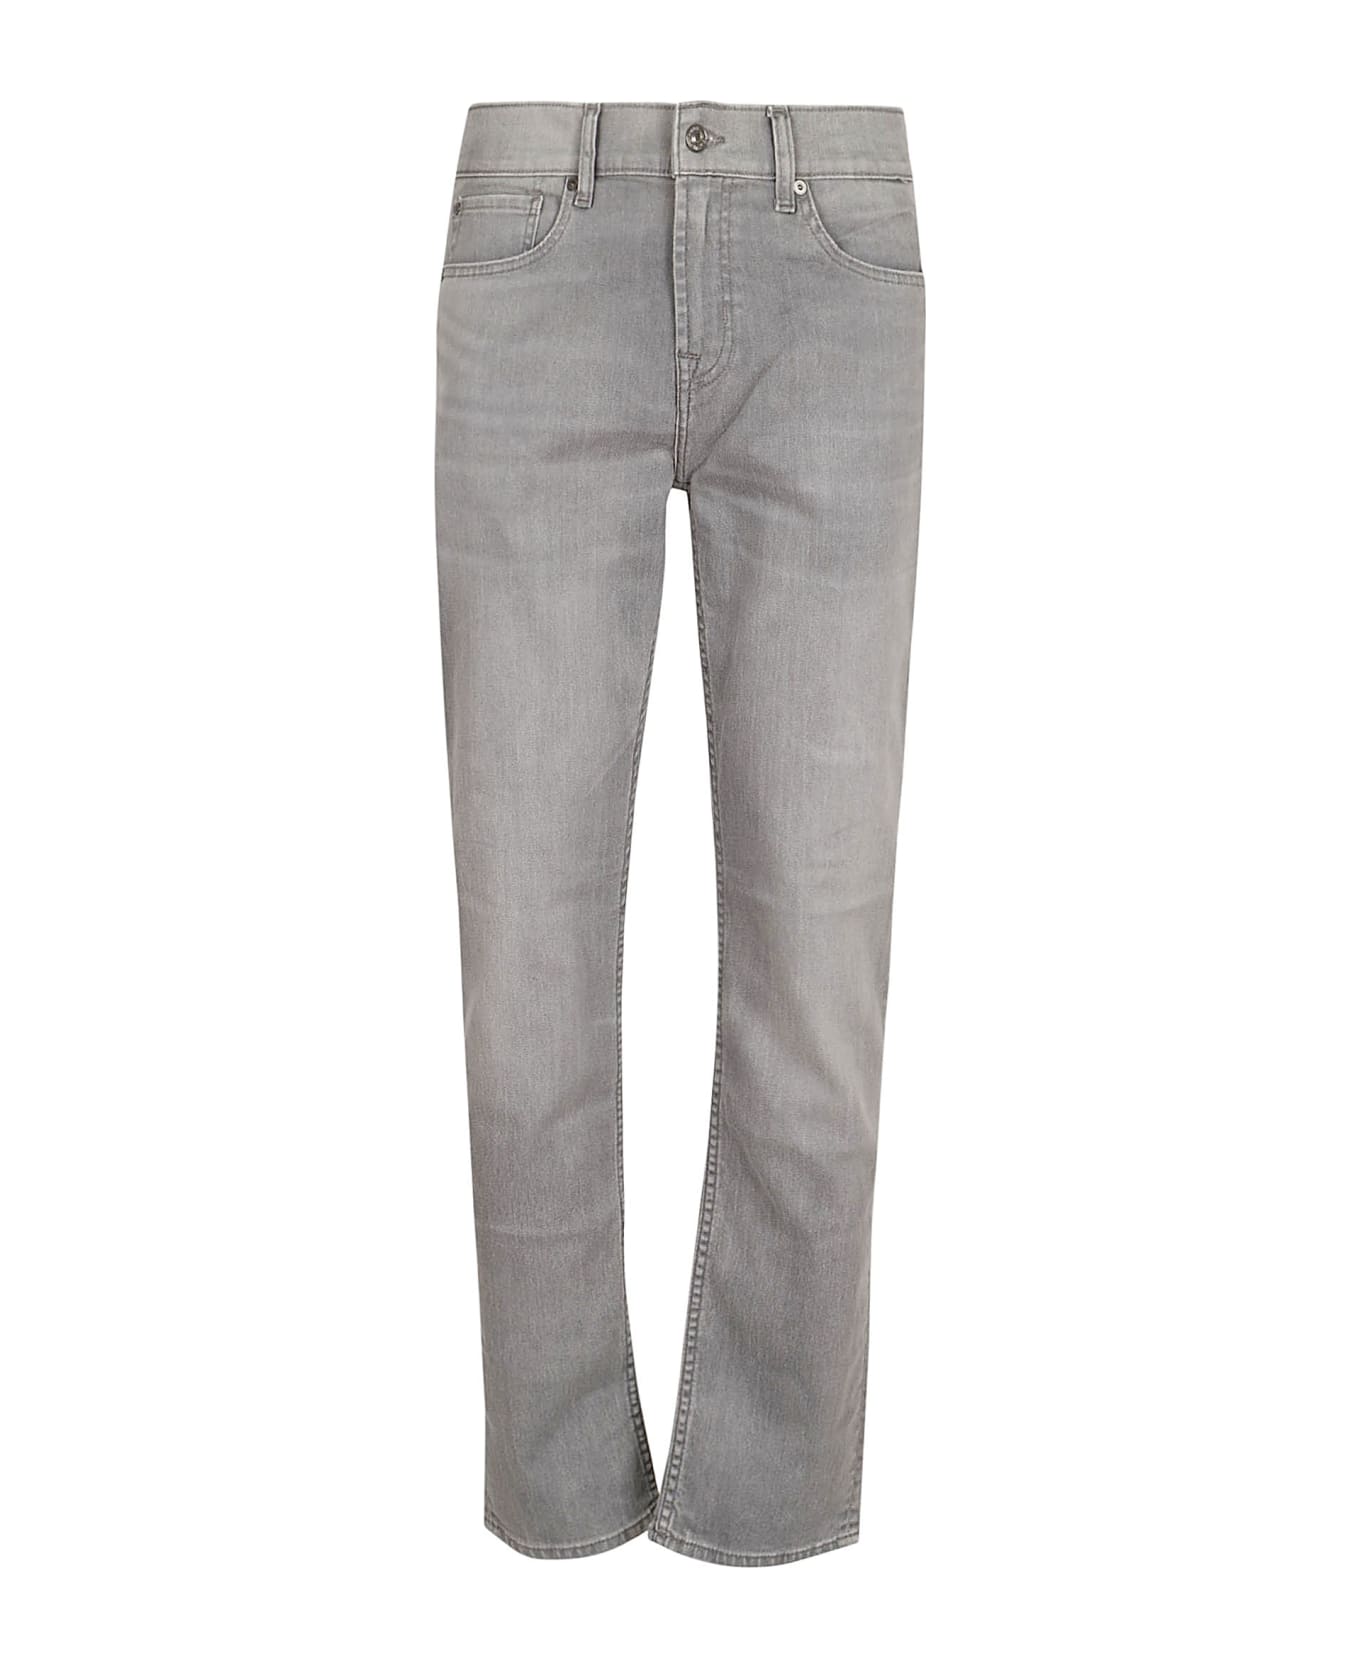 7 For All Mankind Slimmy Advance - Grey デニム